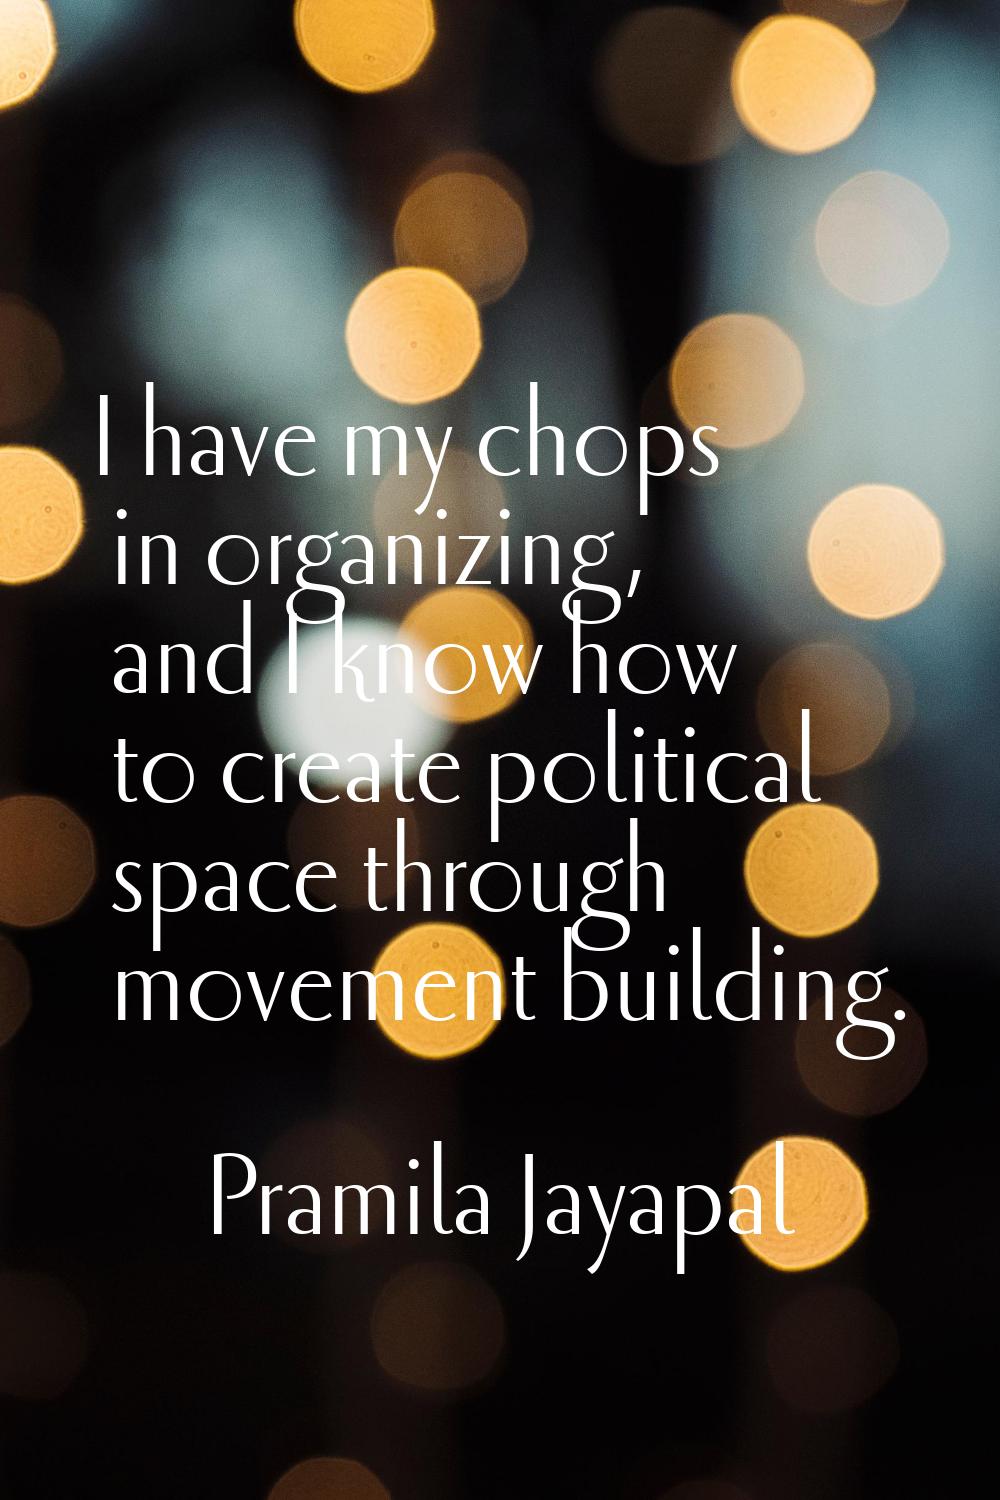 I have my chops in organizing, and I know how to create political space through movement building.